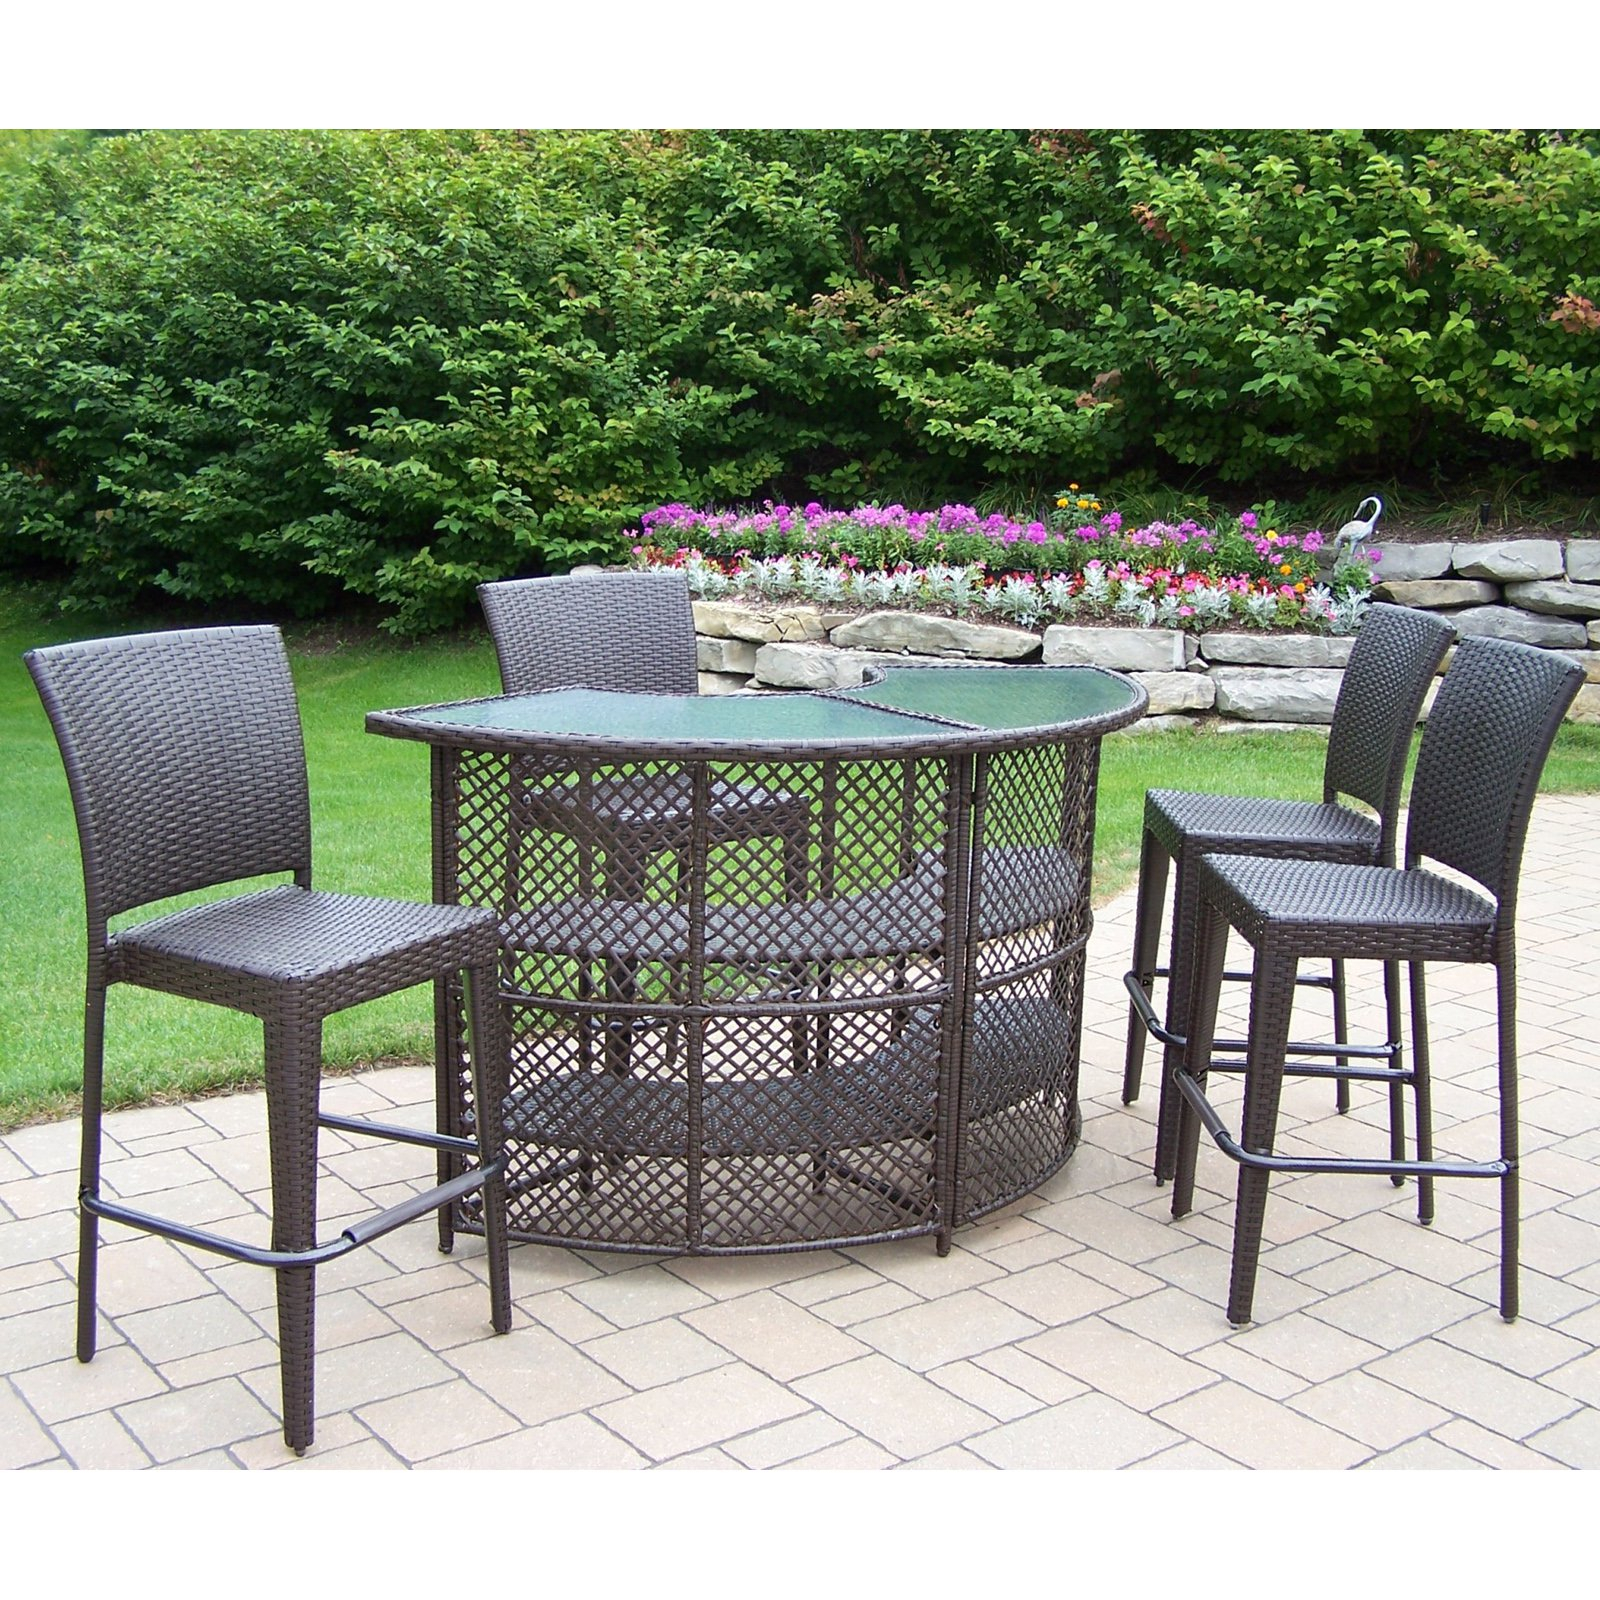 Furniture Outdoor Patio Bar Sets On Inspiration Interior inside sizing 1600 X 1600